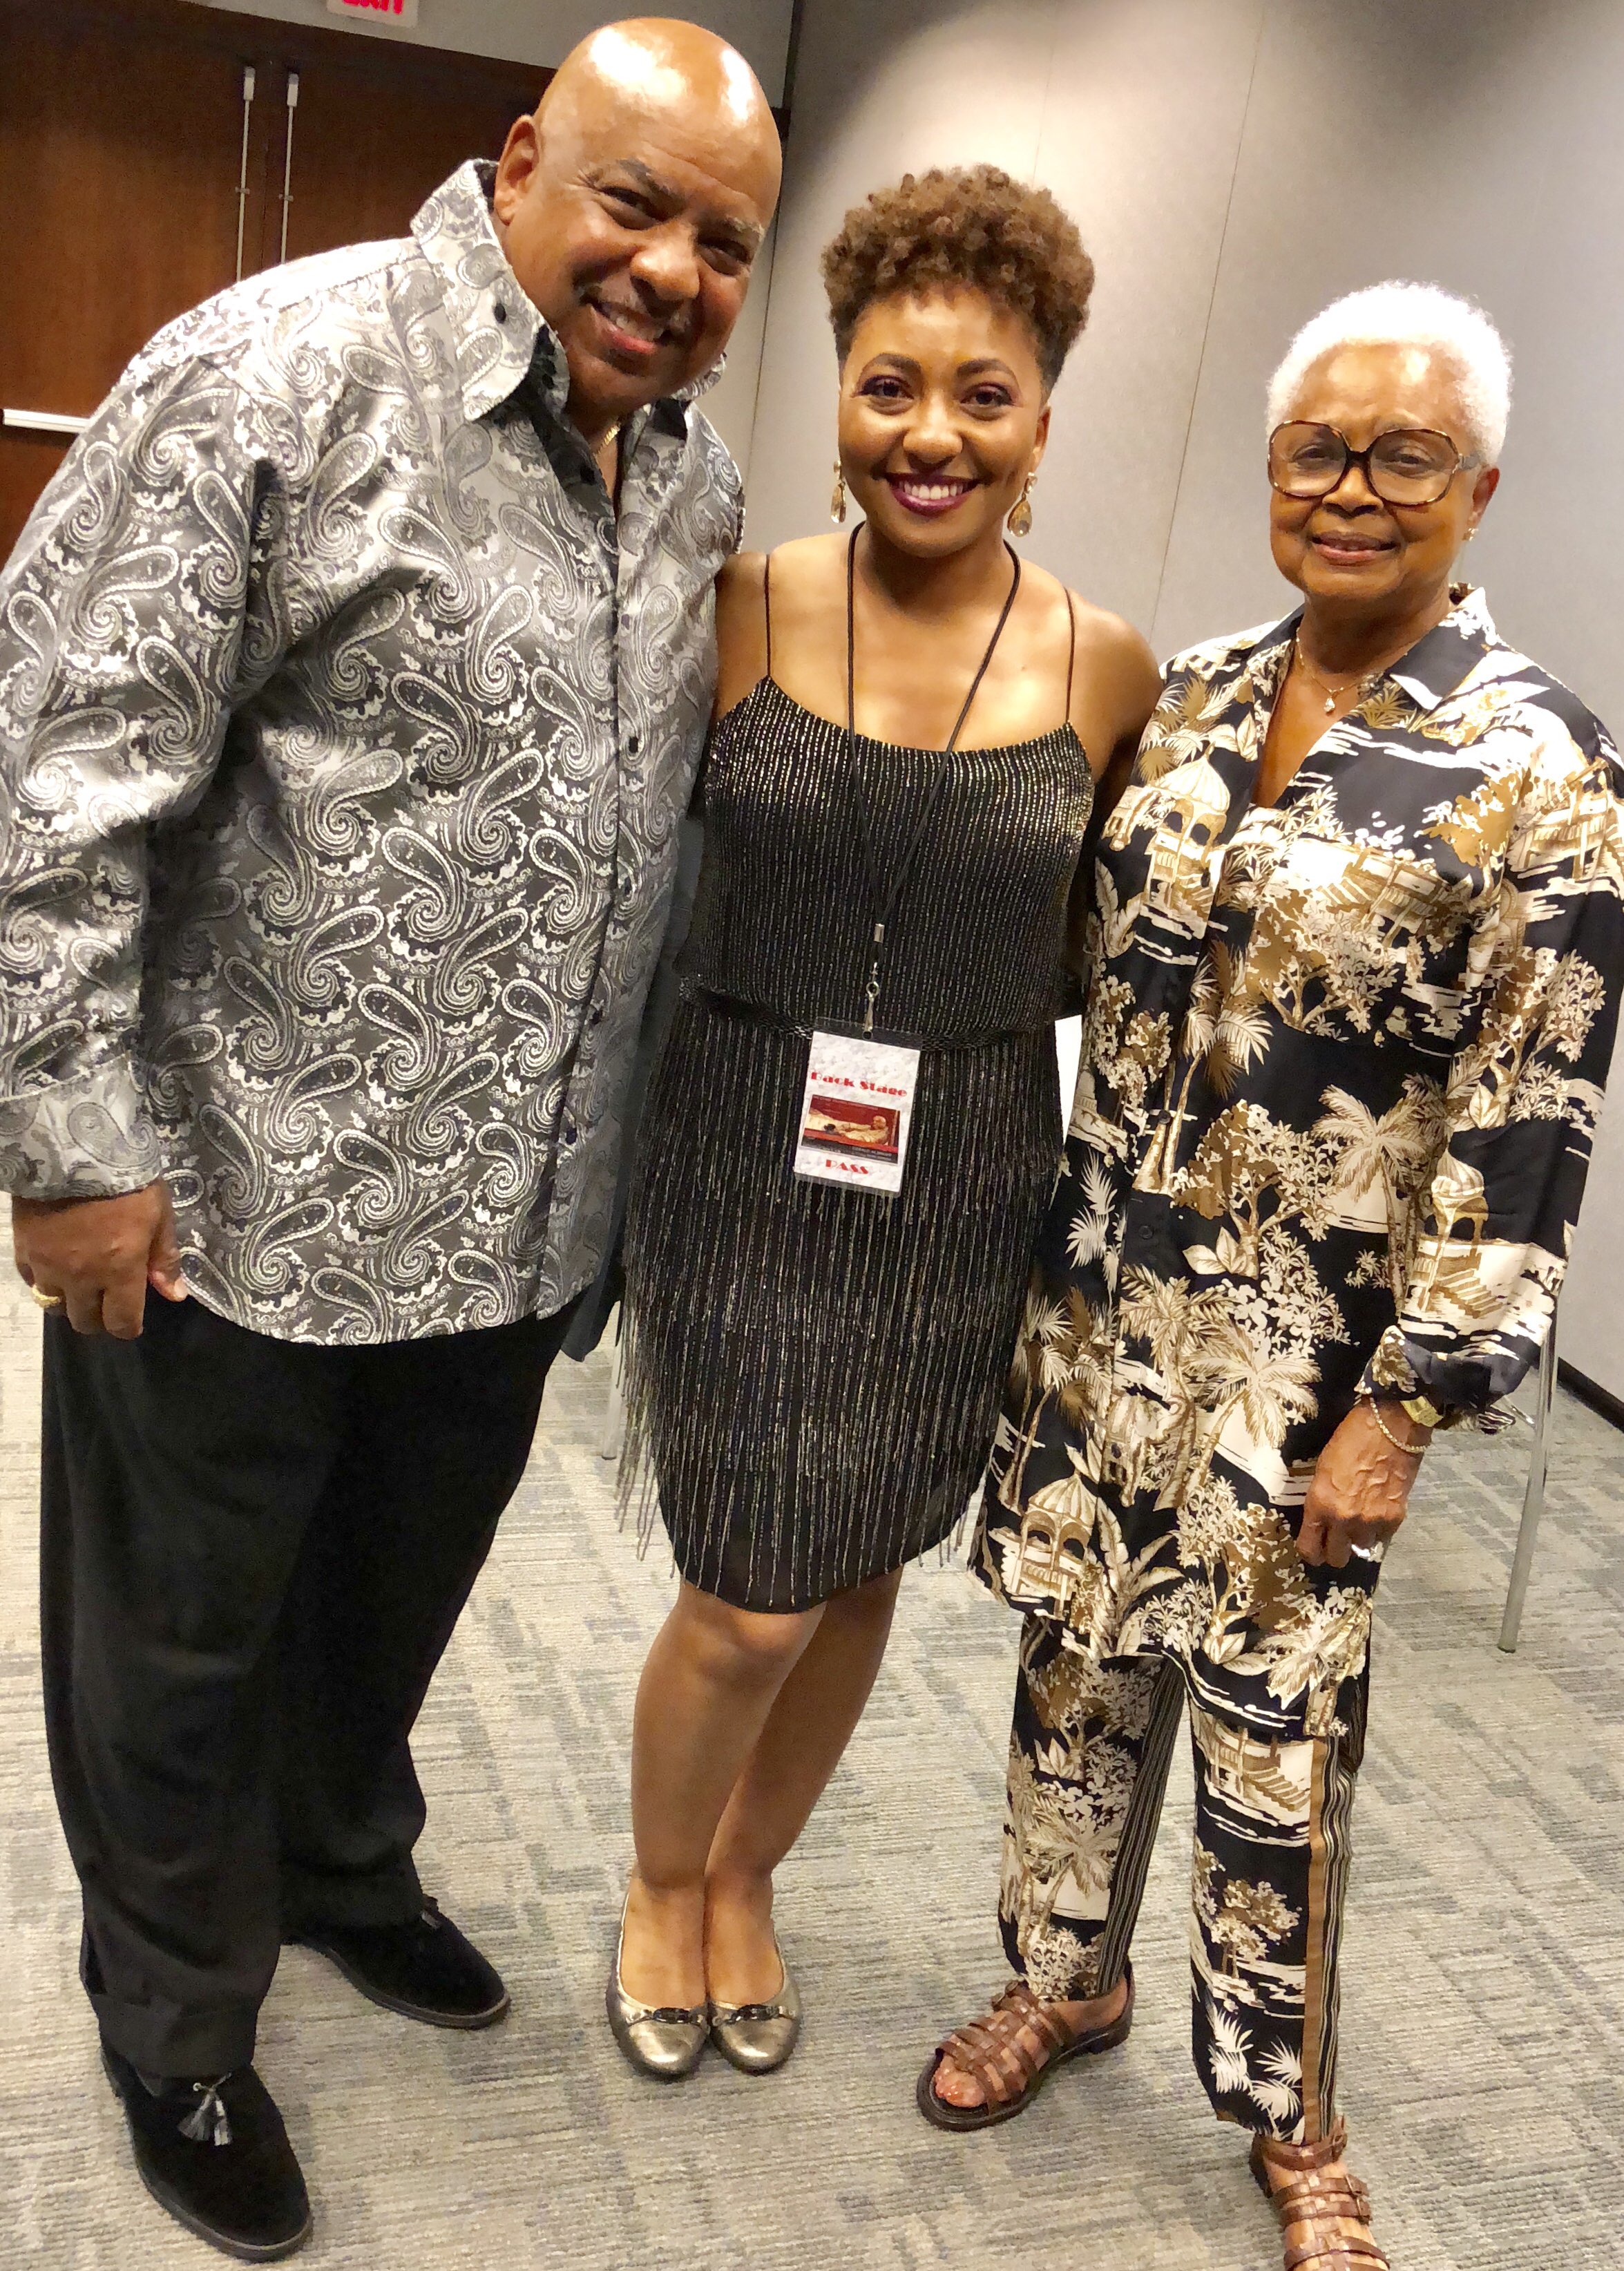 Gerald Albright on Twitter: So very pleased to say hello to our new friend  Billie Aaron, wife of baseball legend Hank Aaron, last night at me and  Selina's performance at “Jazz Under